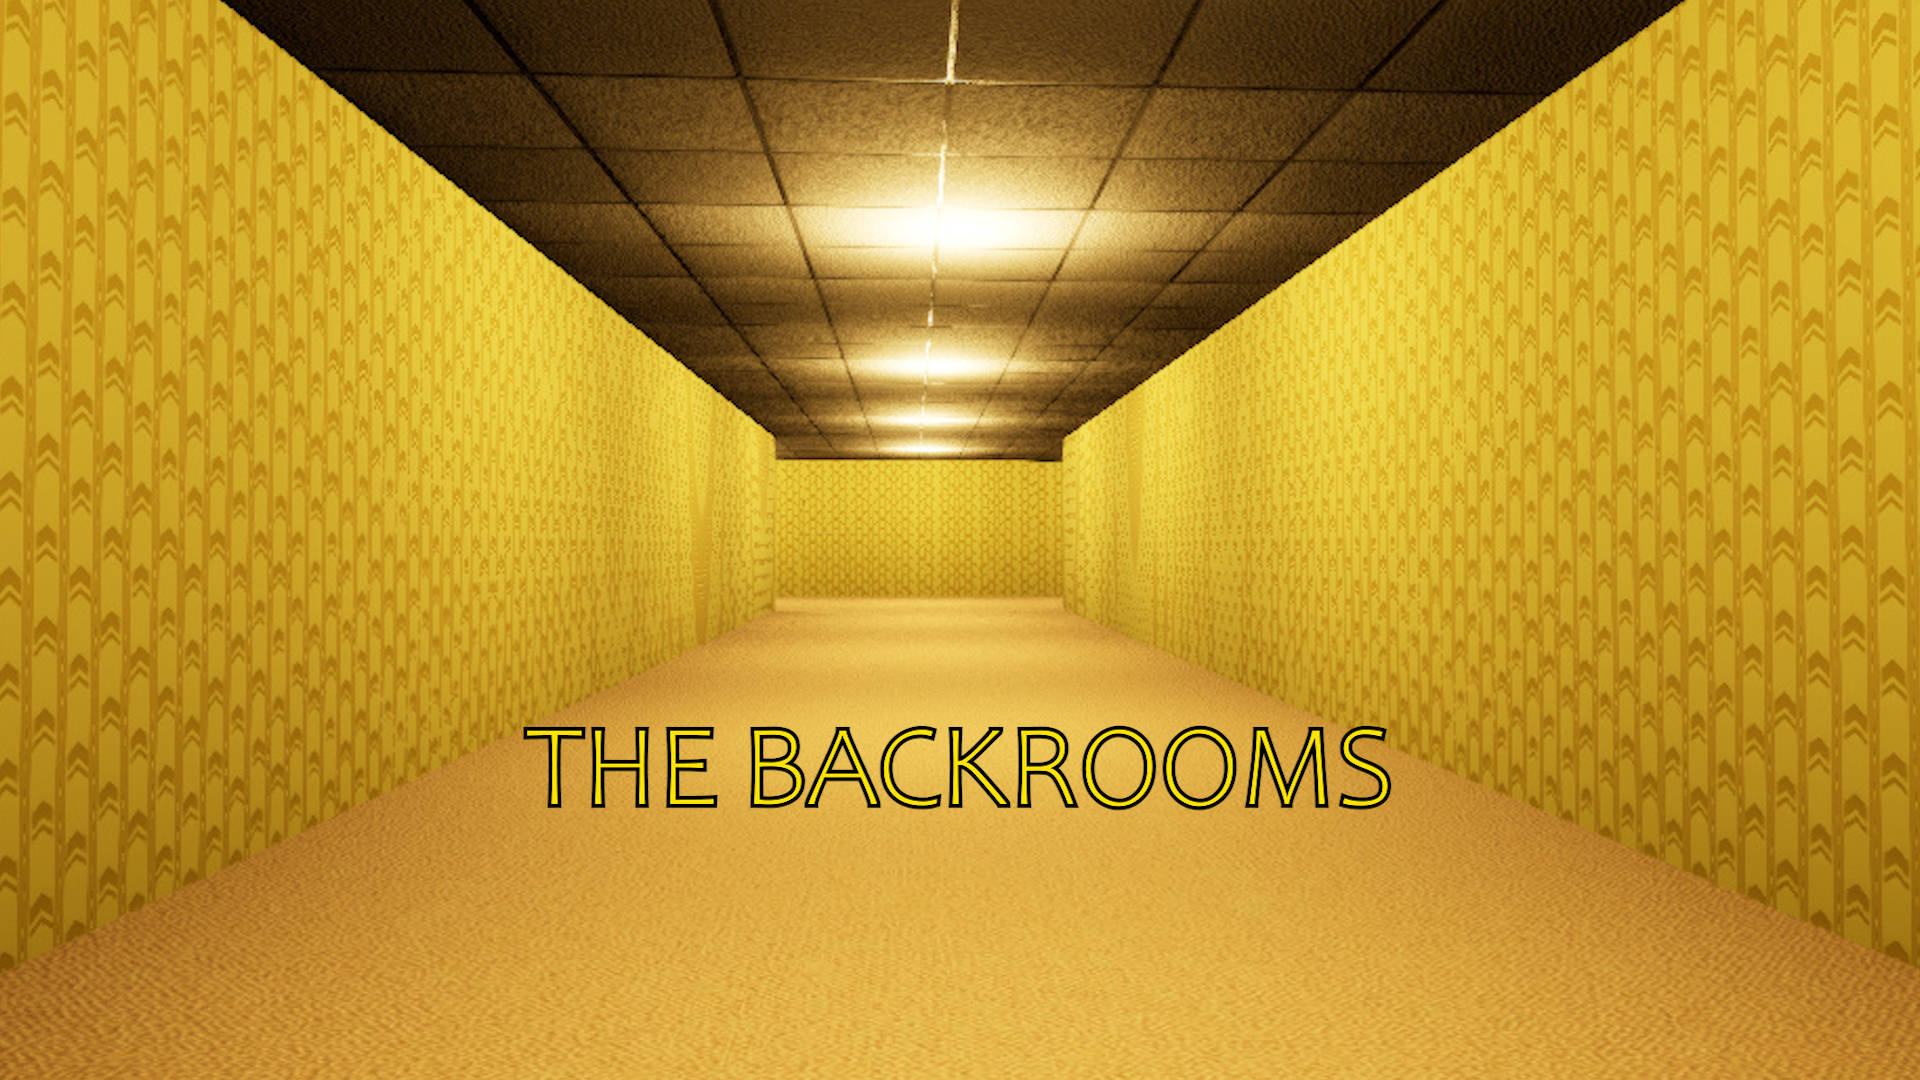 The Backrooms (English)